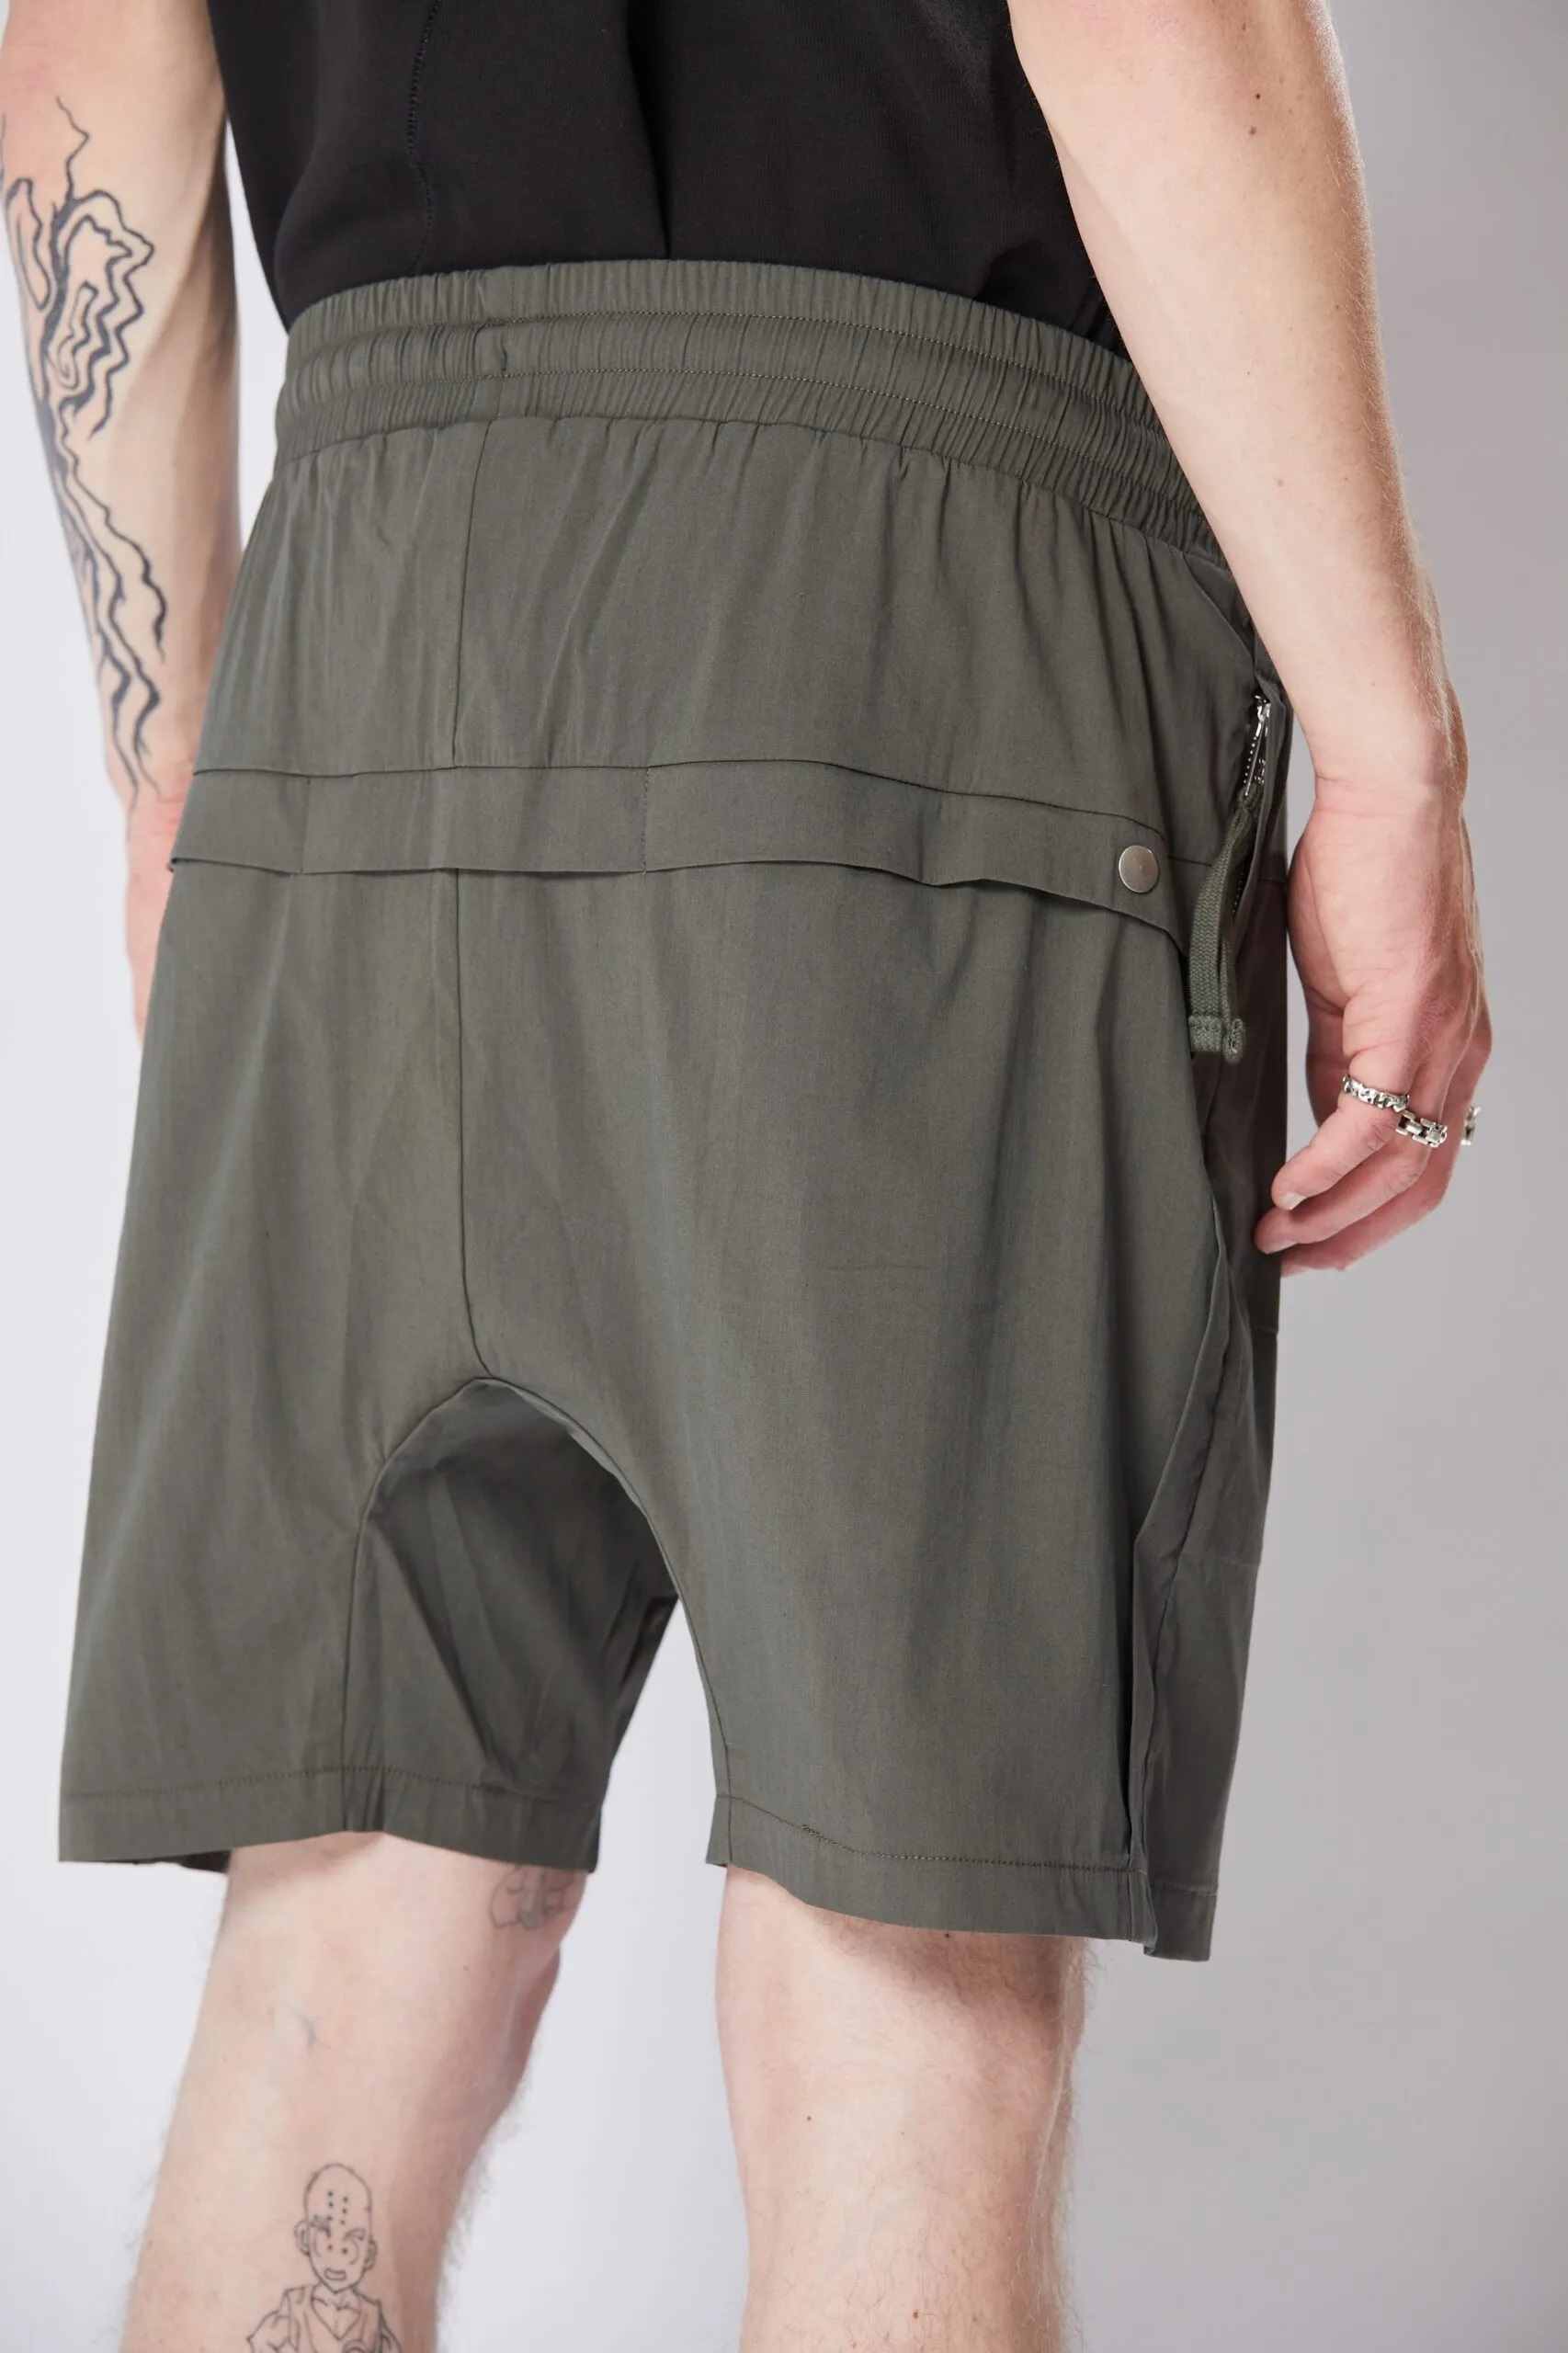 THOM KROM Shorts in Ivy Green S